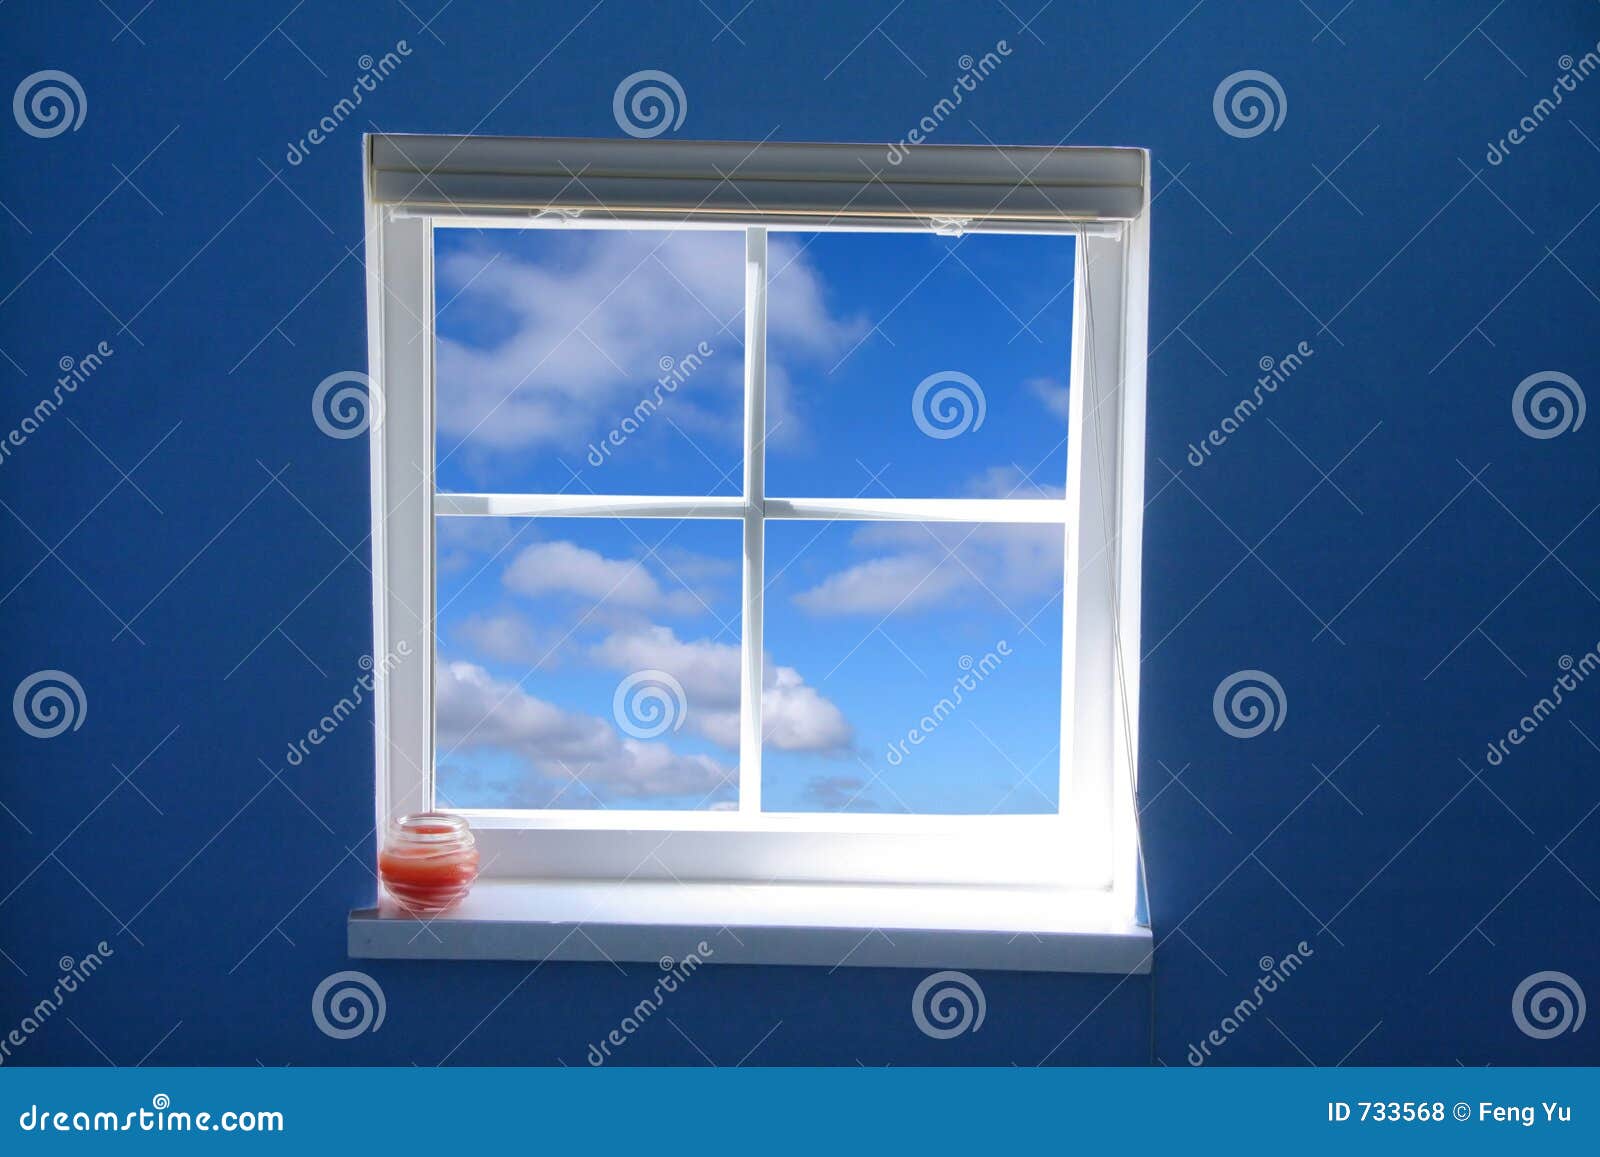 Window And Blue Sky Royalty Free Stock Photos  Image: 733568